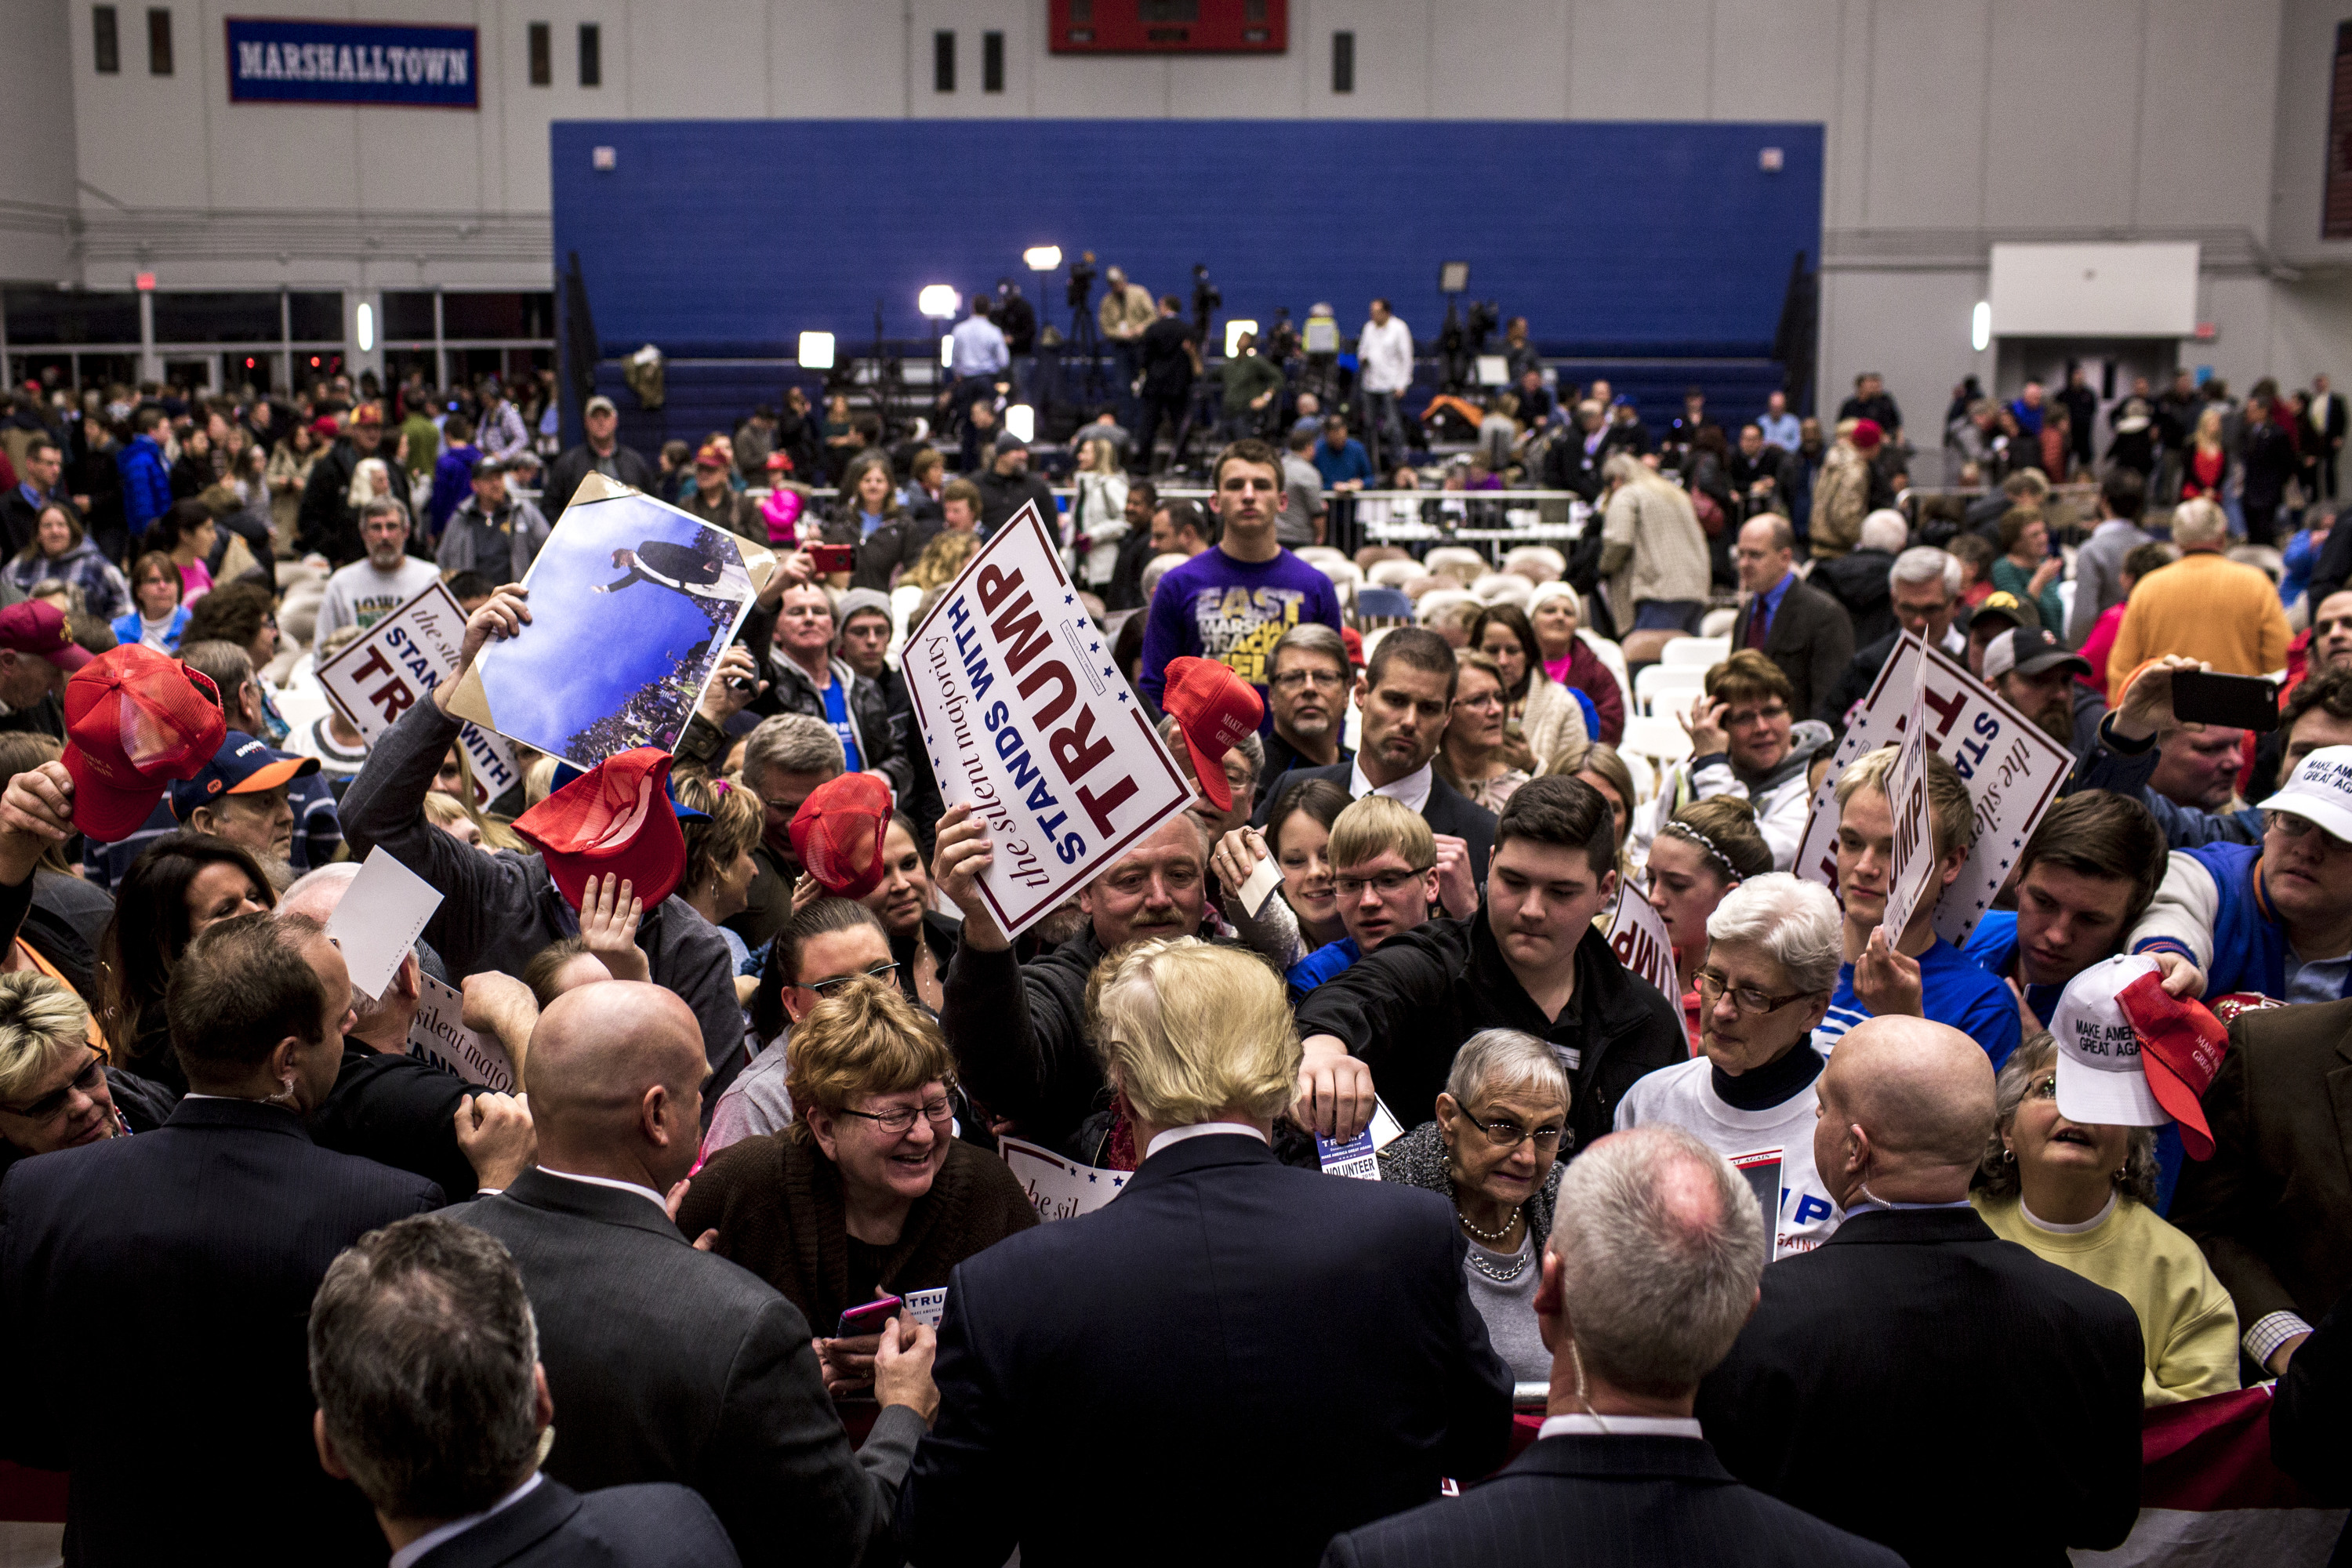 Donald Trump greets supporters at a rally on Jan. 26, 2016, in Des Moines, Iowa. (Natalie Keyssar for TIME)